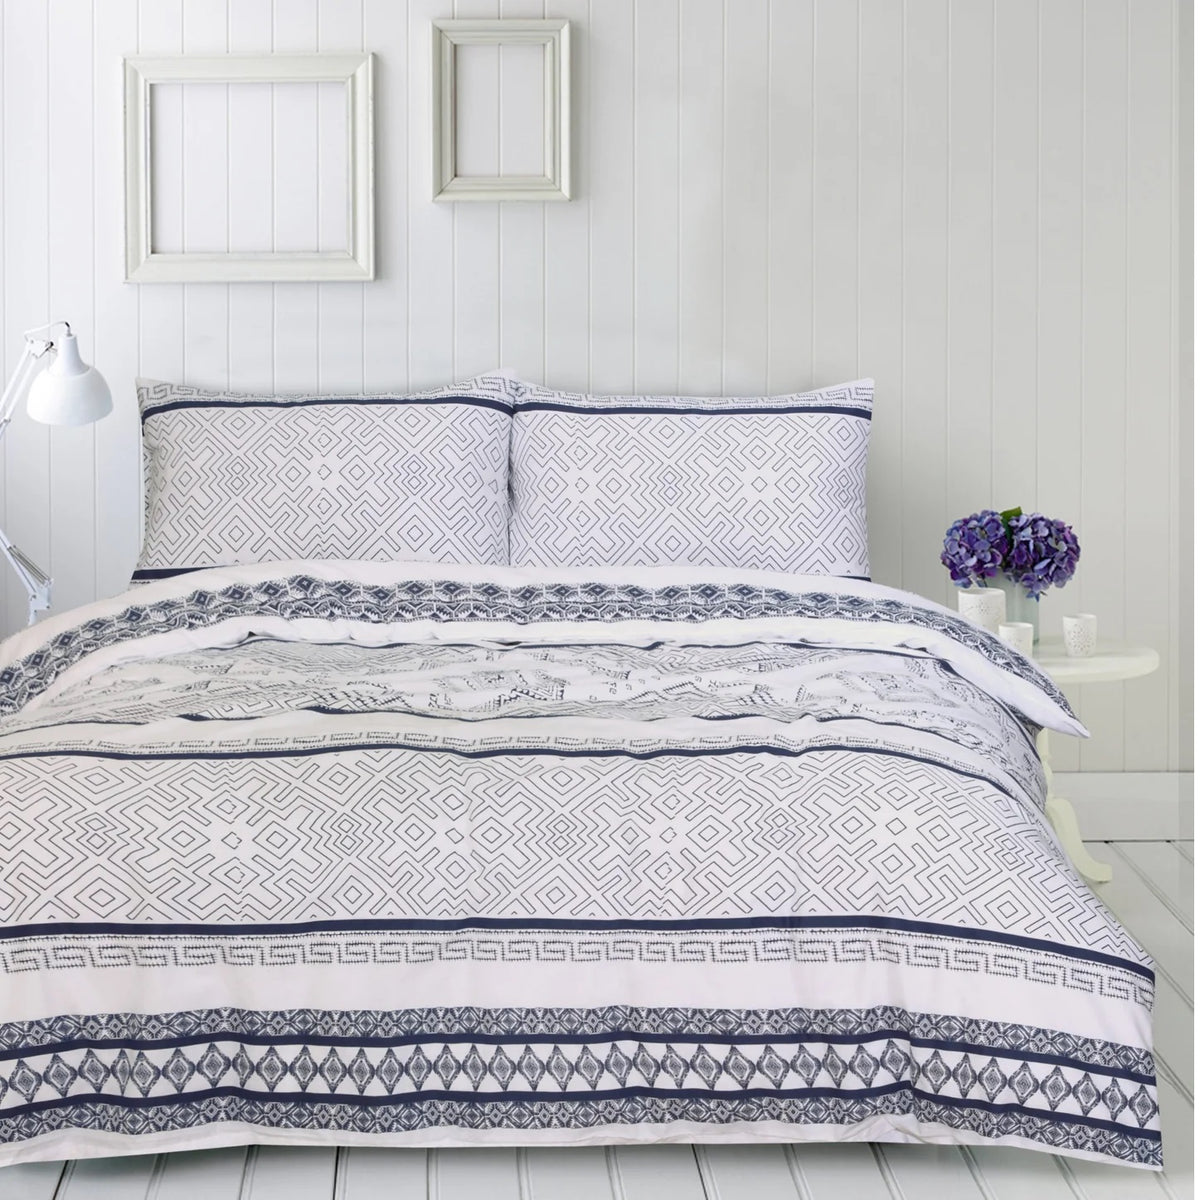 New Hampton Pure Cotton Quilt Duvet Doona Cover With Extra Standard Pillowcases - Blue White